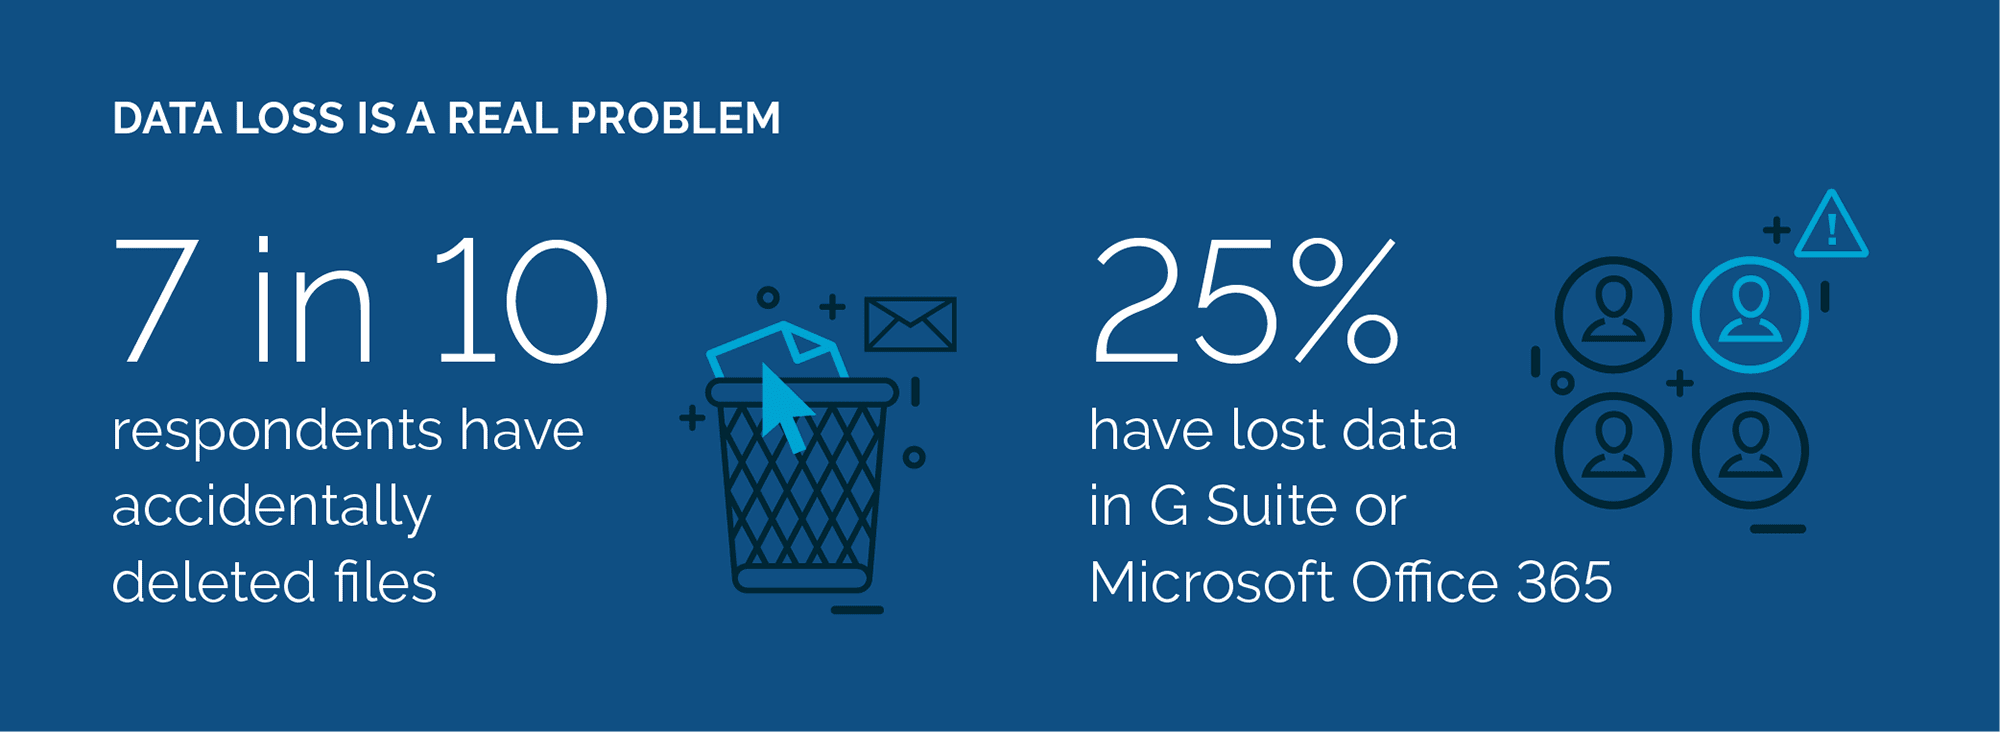 A data graphic showing that data loss is a real problem and the statistics for data loss that were uncovered in the survey.